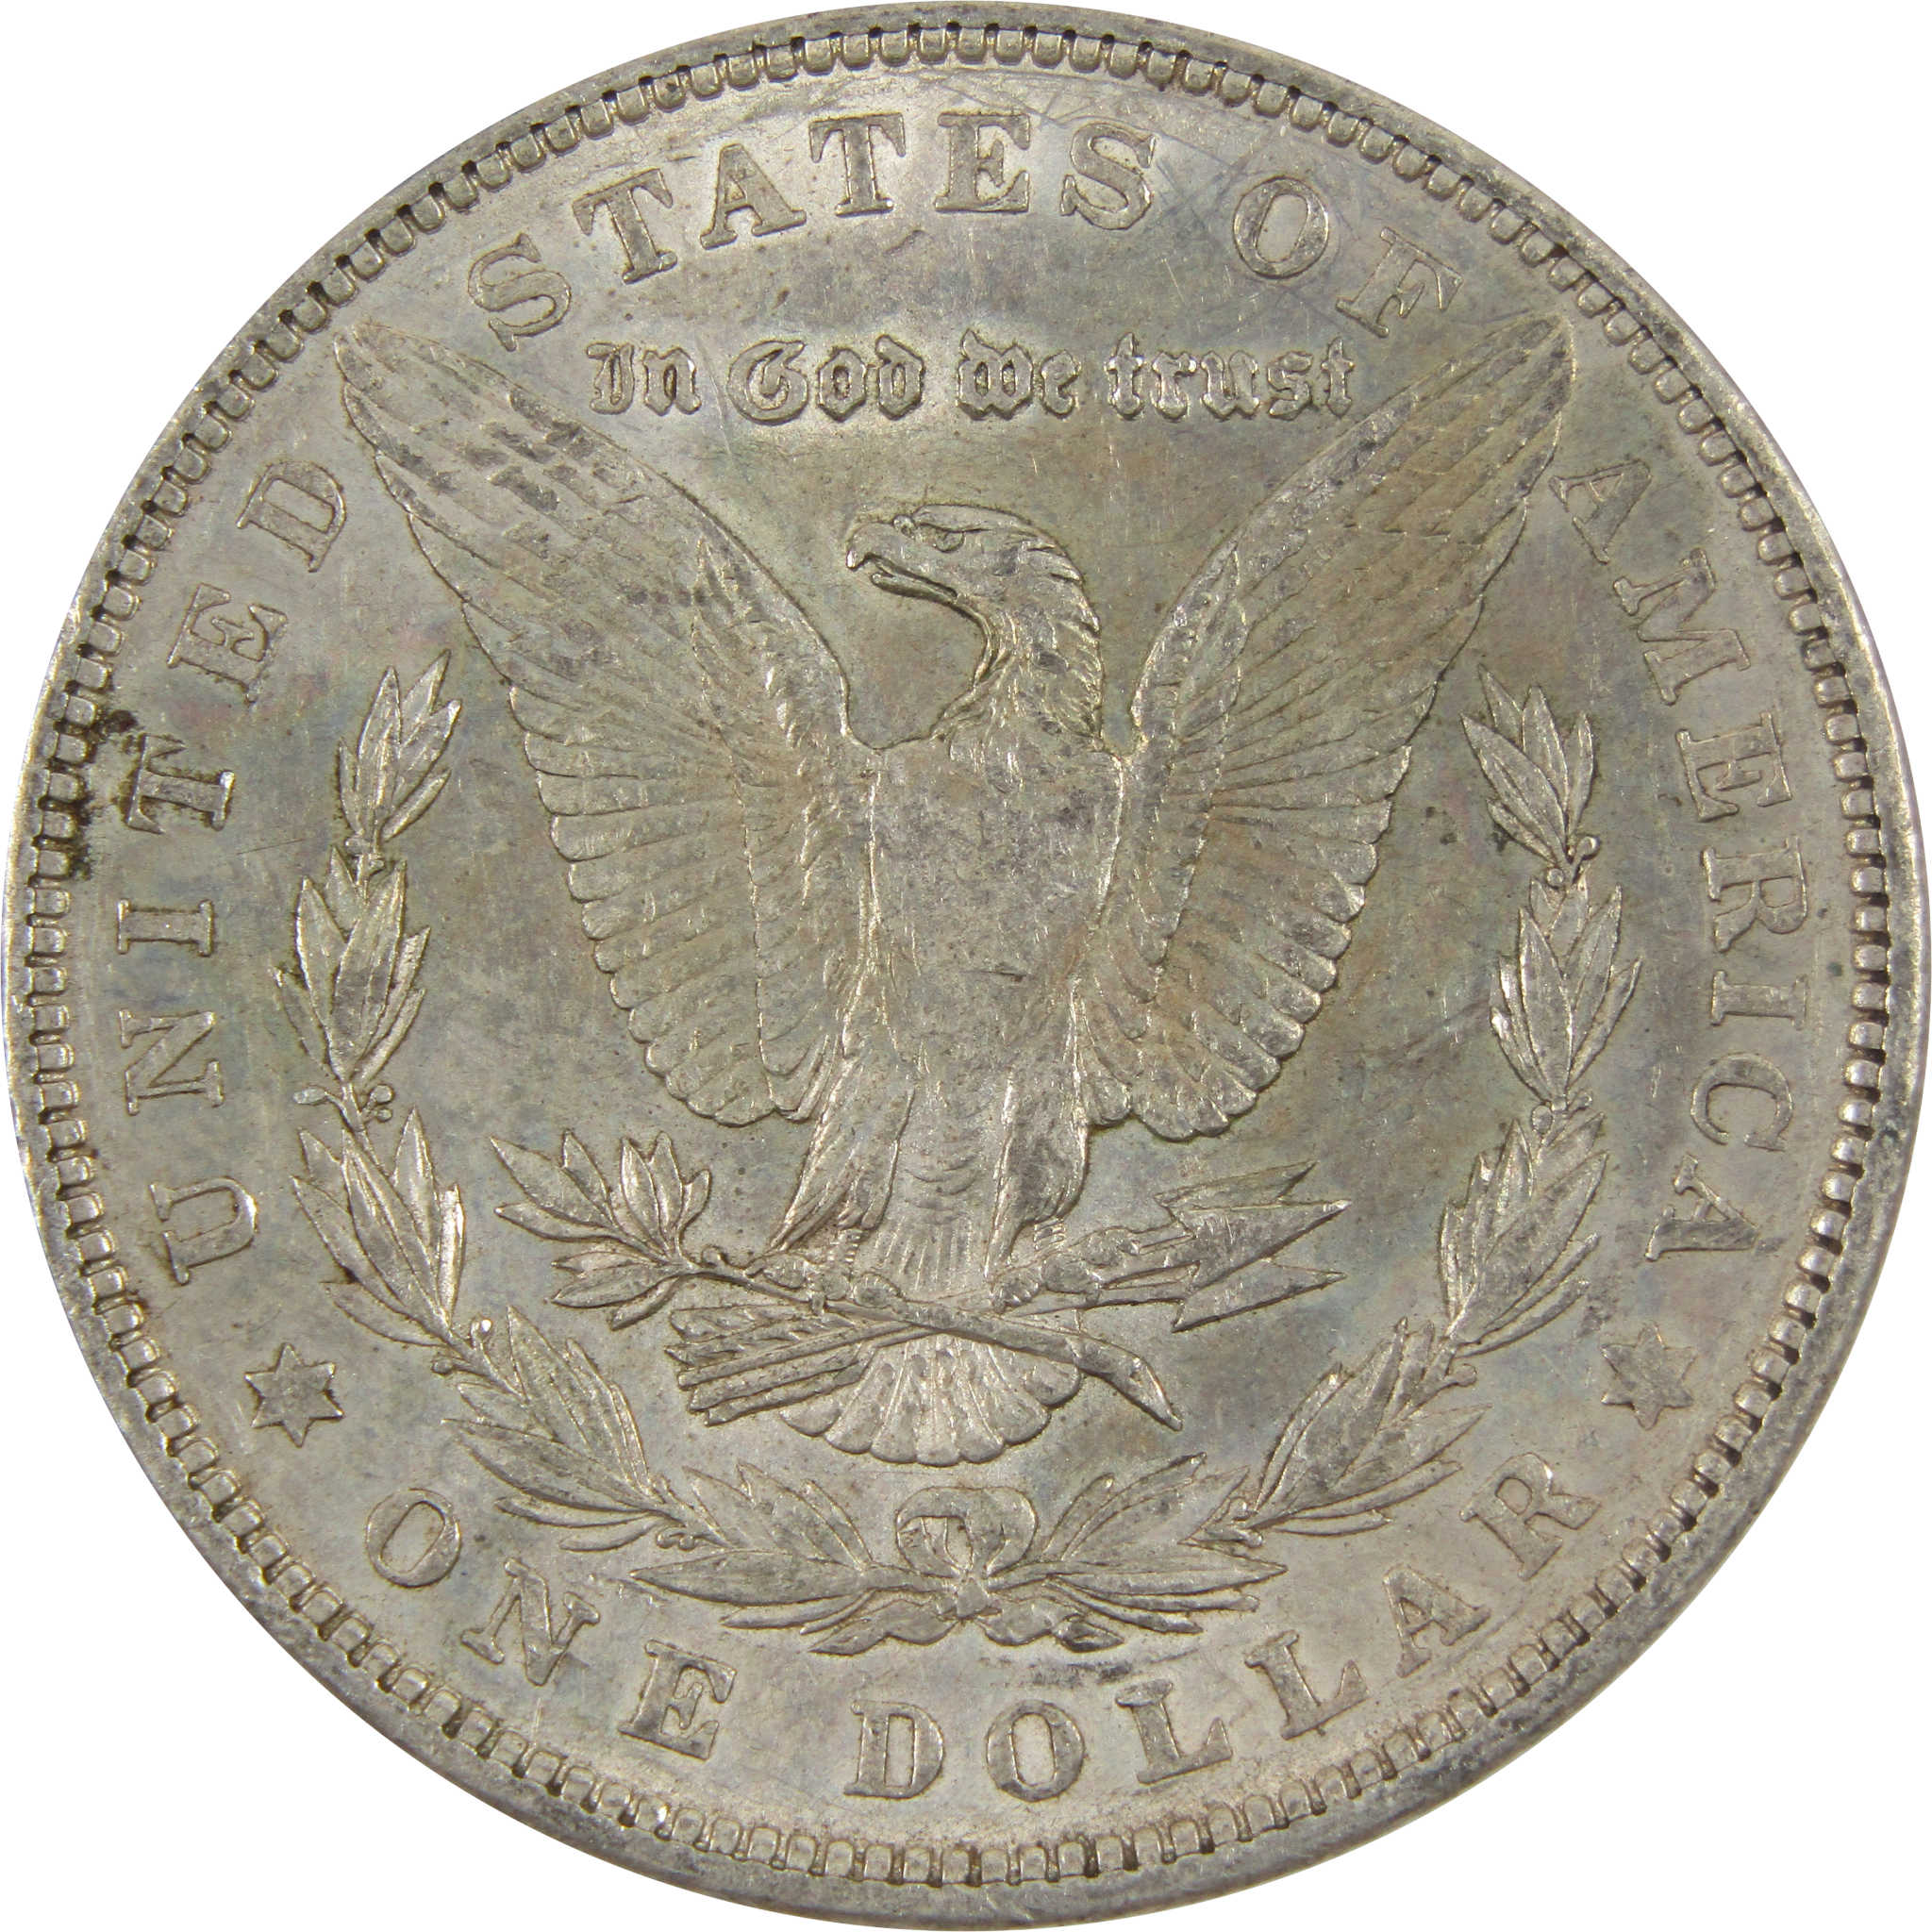 1902 Morgan Dollar AU About Uncirculated 90% Silver $1 Coin SKU:I7567 - Morgan coin - Morgan silver dollar - Morgan silver dollar for sale - Profile Coins &amp; Collectibles